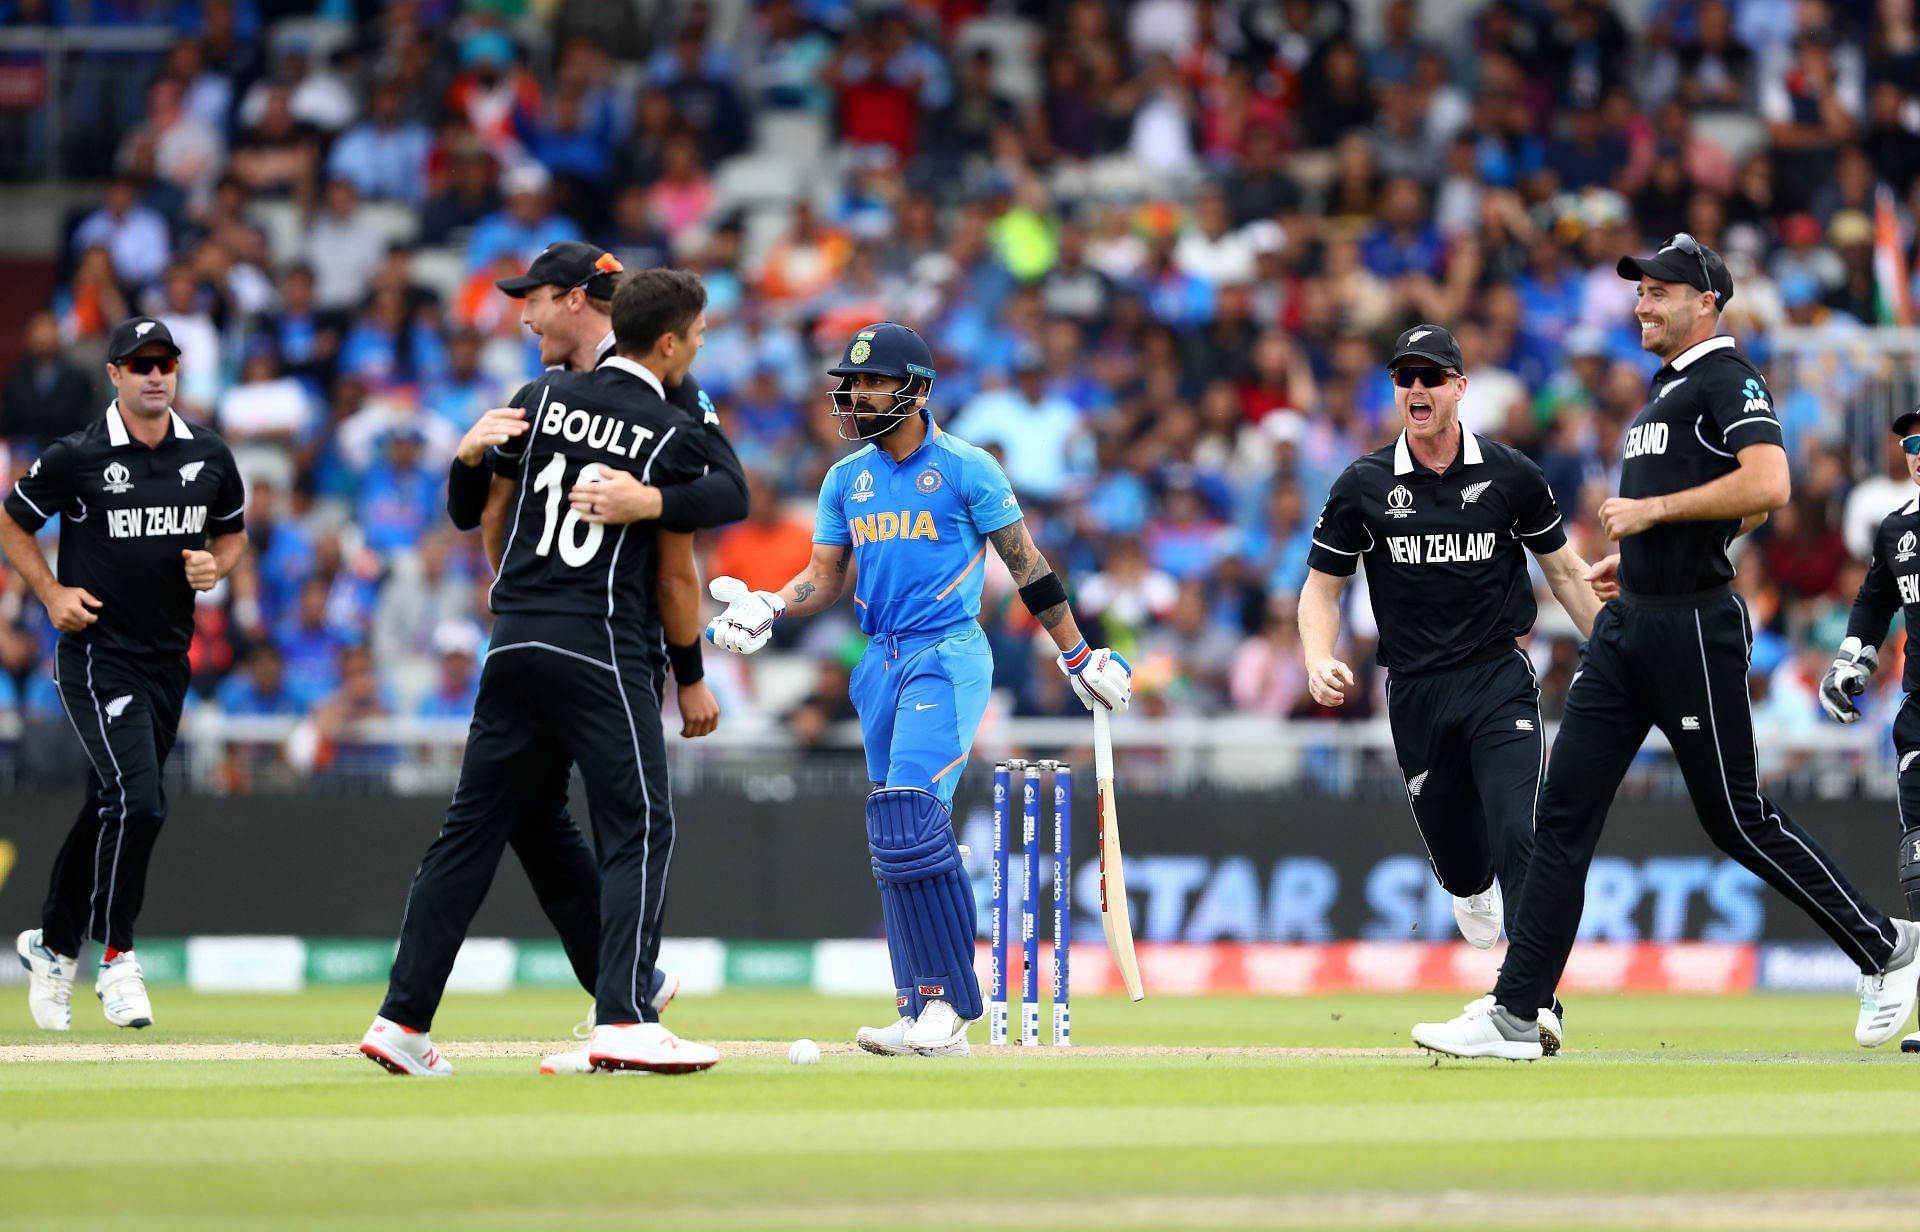 New Zealand bowlers ripped through the top-order